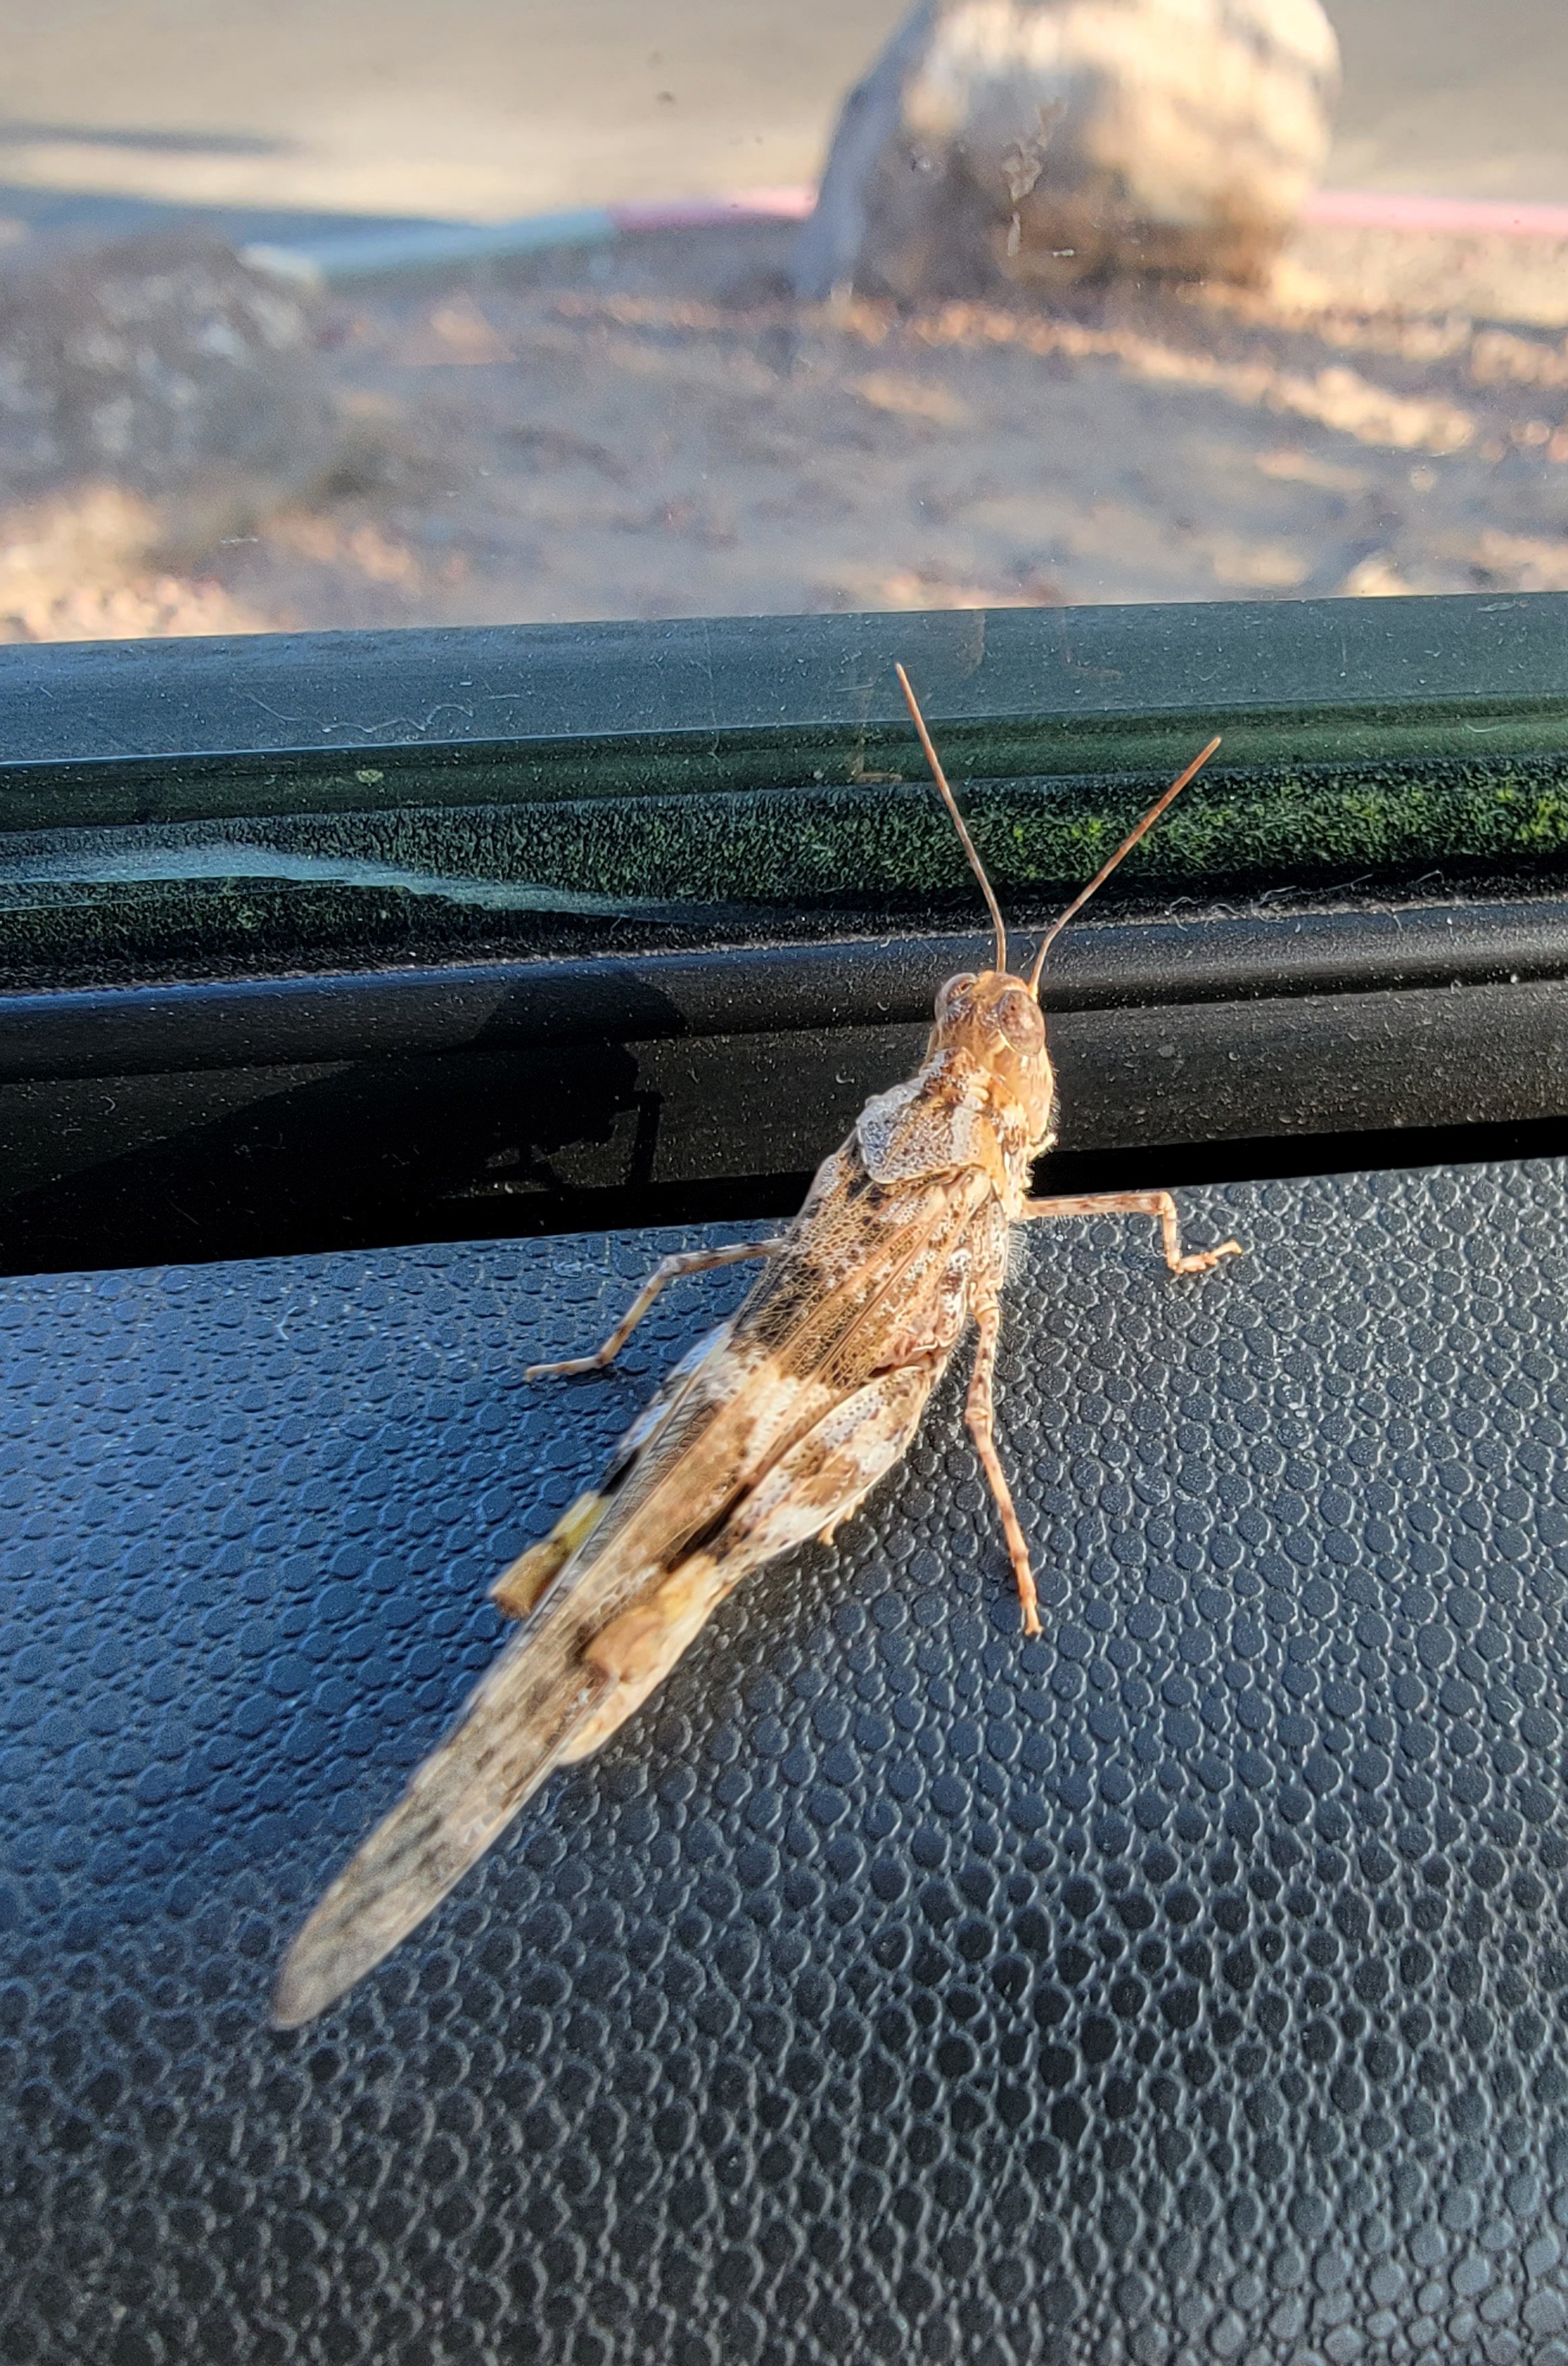 Woke up to a few of these little guys having made their way in the car. Had to leave windows open all night to even have a chance at sleeping...